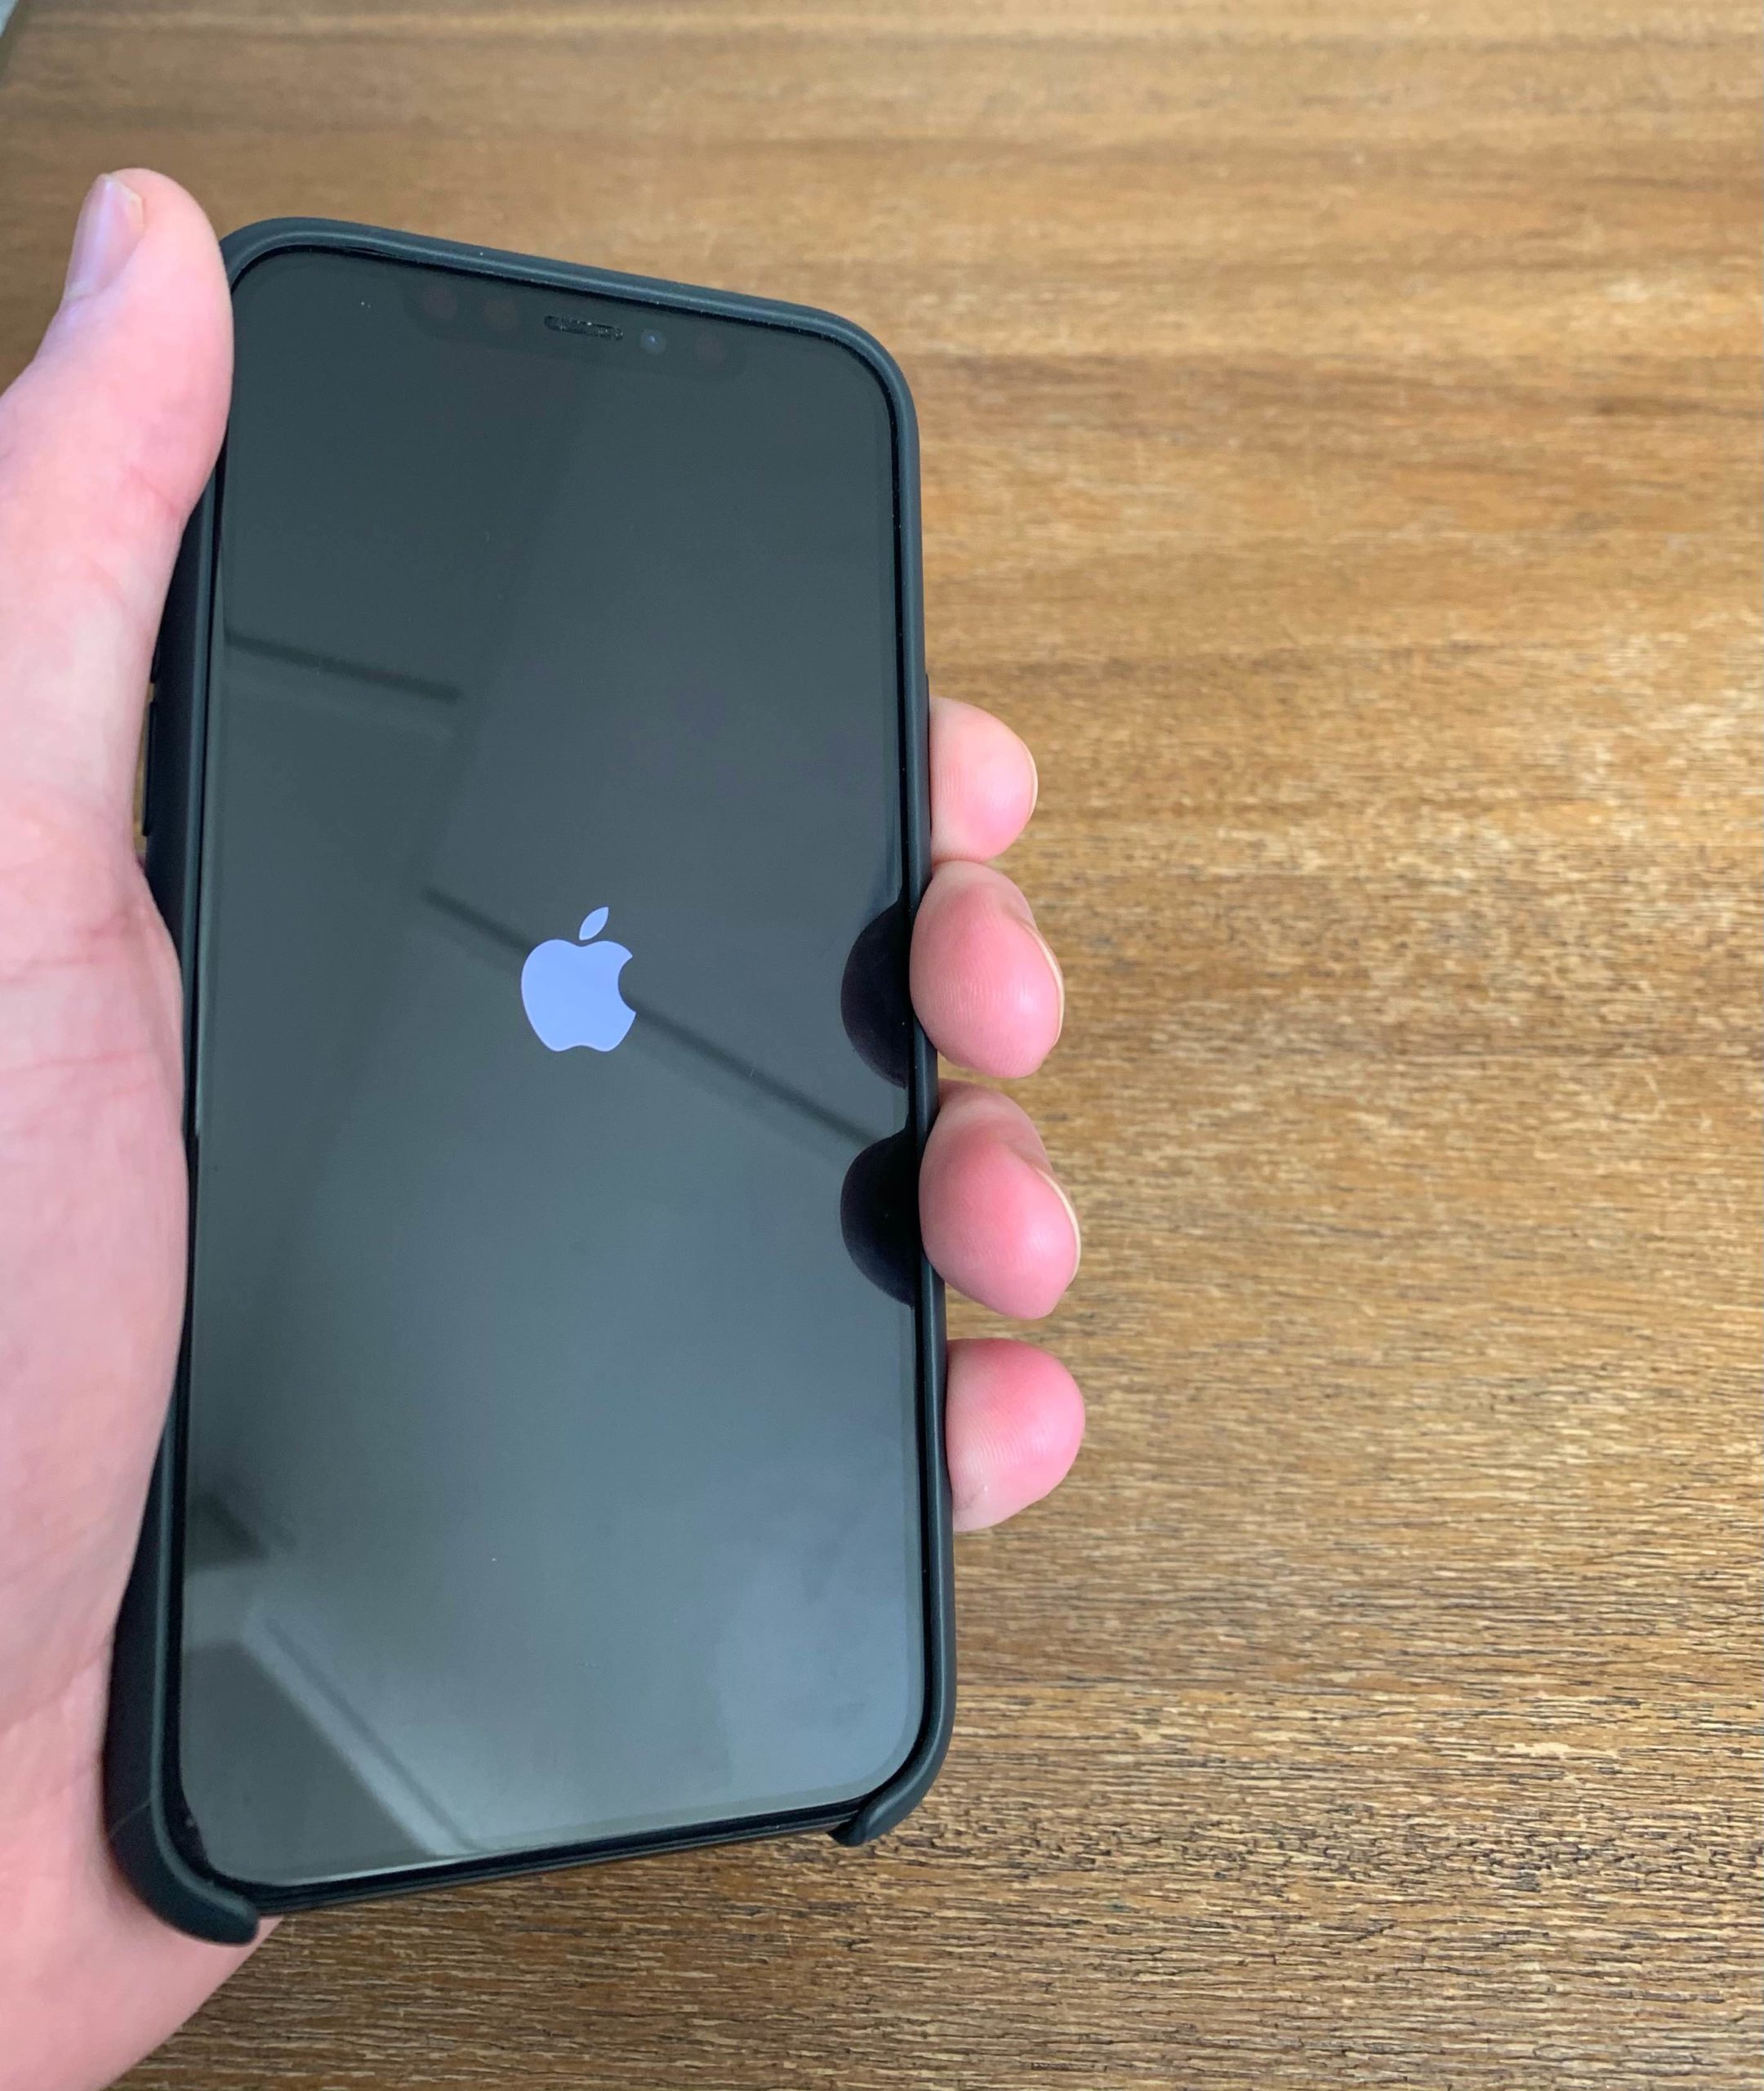 hold iphone 11 button side button until apple logo appears